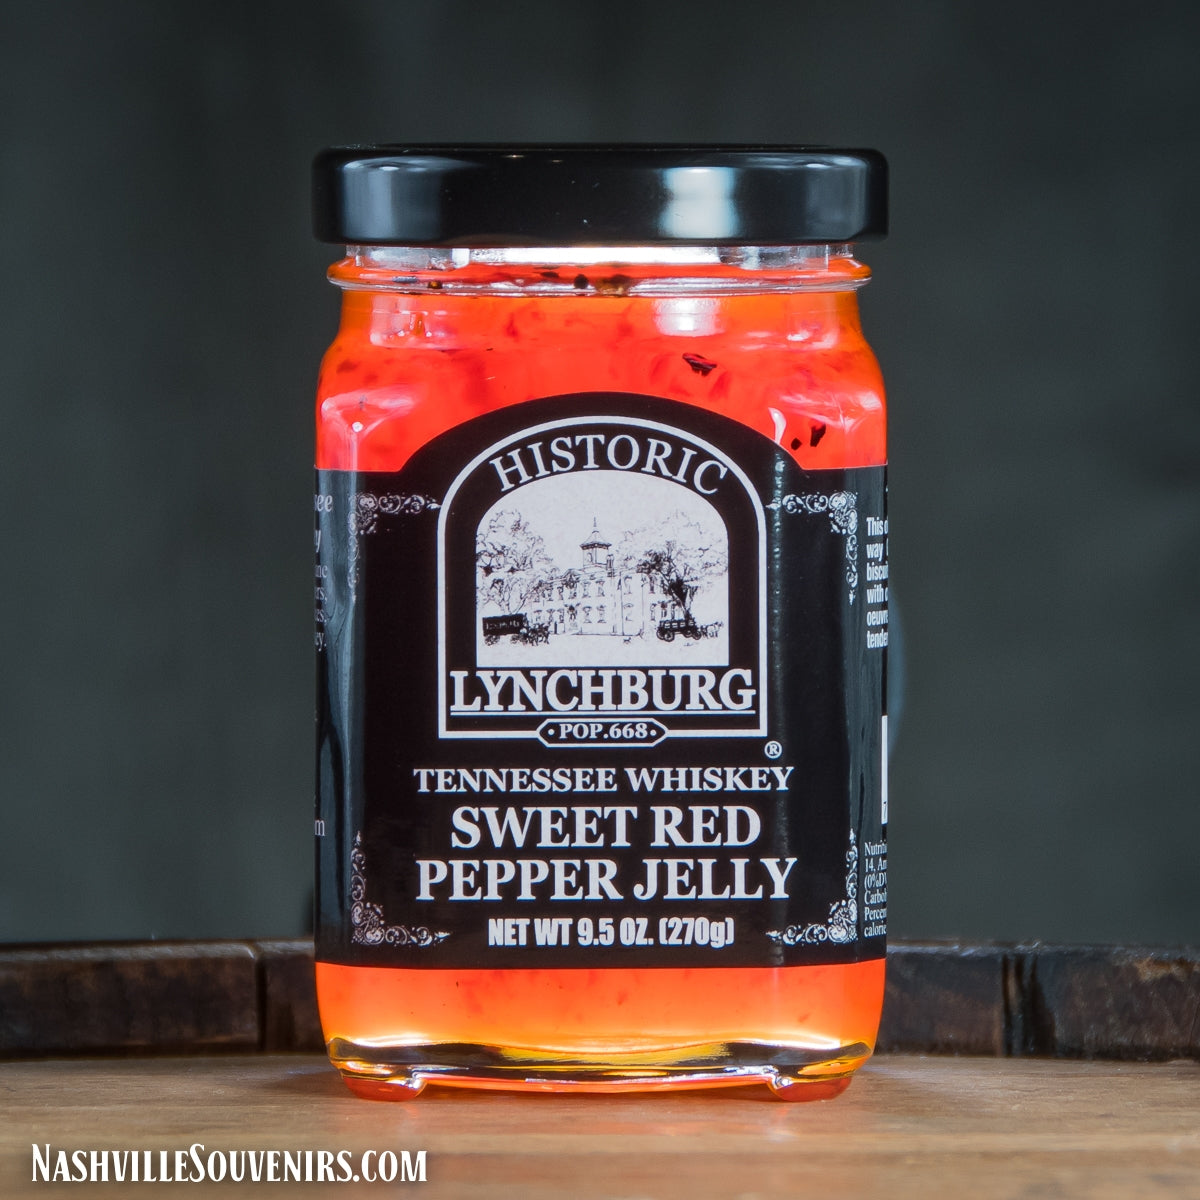 What's the secret sauce in this red pepper jelly? Real Tennessee Jack Daniels Whiskey of course! FREE SHIPPING on all US orders over $75!